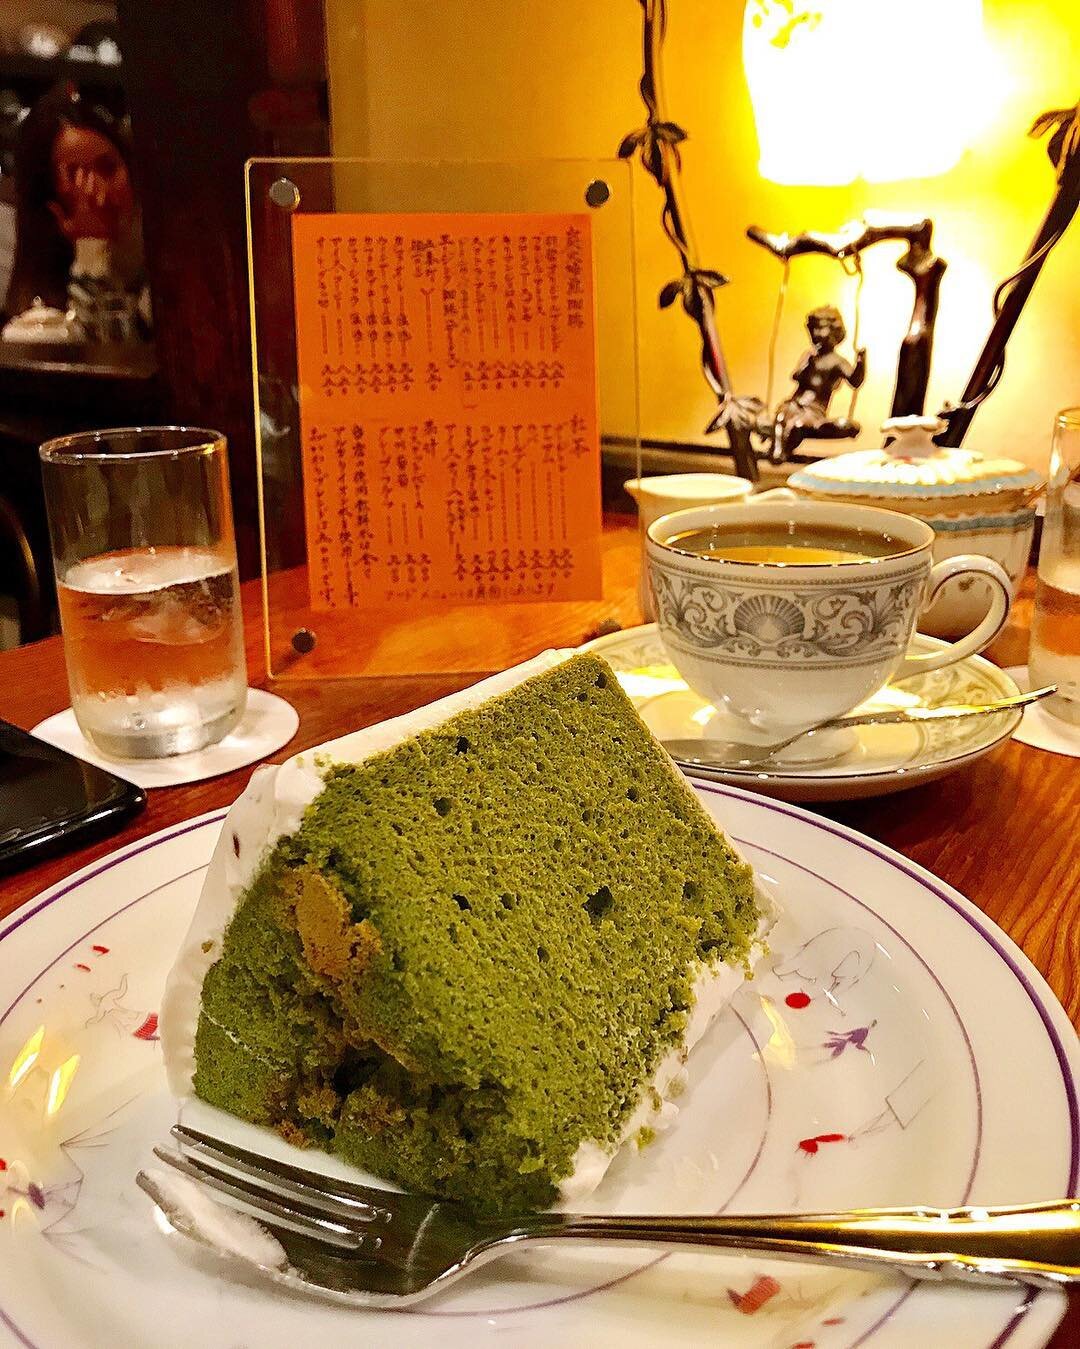 Couldn&rsquo;t leave Tokyo without eating this chiffon cake 🍰 ☕️ #coffeeaddict #coffeelover #chateihatou #love #chiffoncake #sweettooth #japan #tokyo #shibuya #koheecoffee #followus